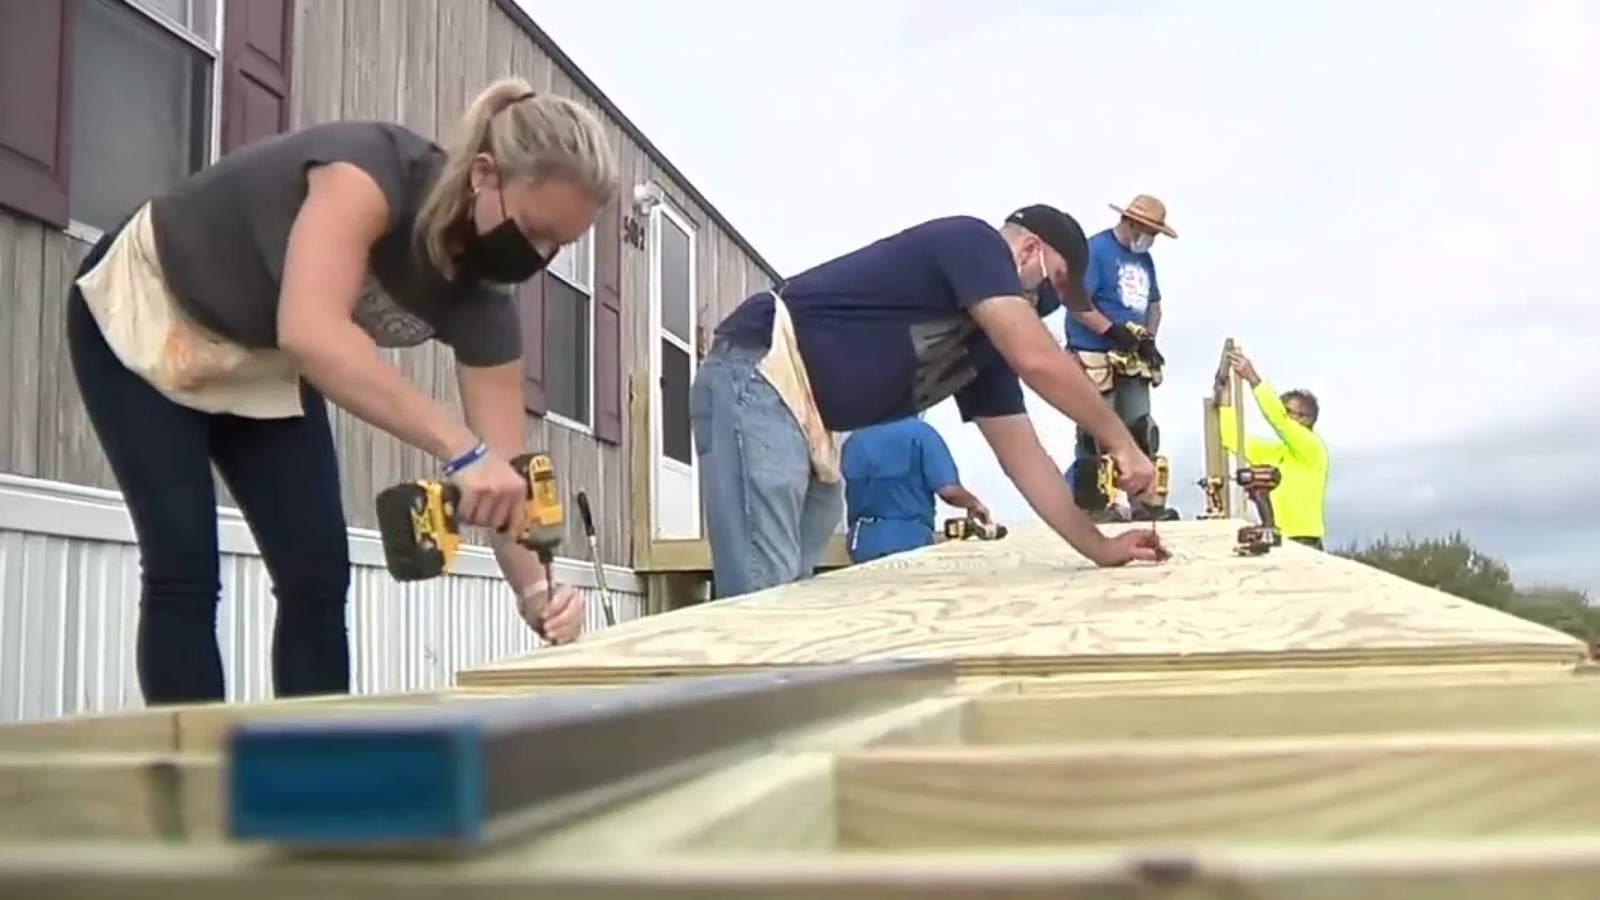 Texas Ramp Project helps provide freedom, mobility for San Antonio woman